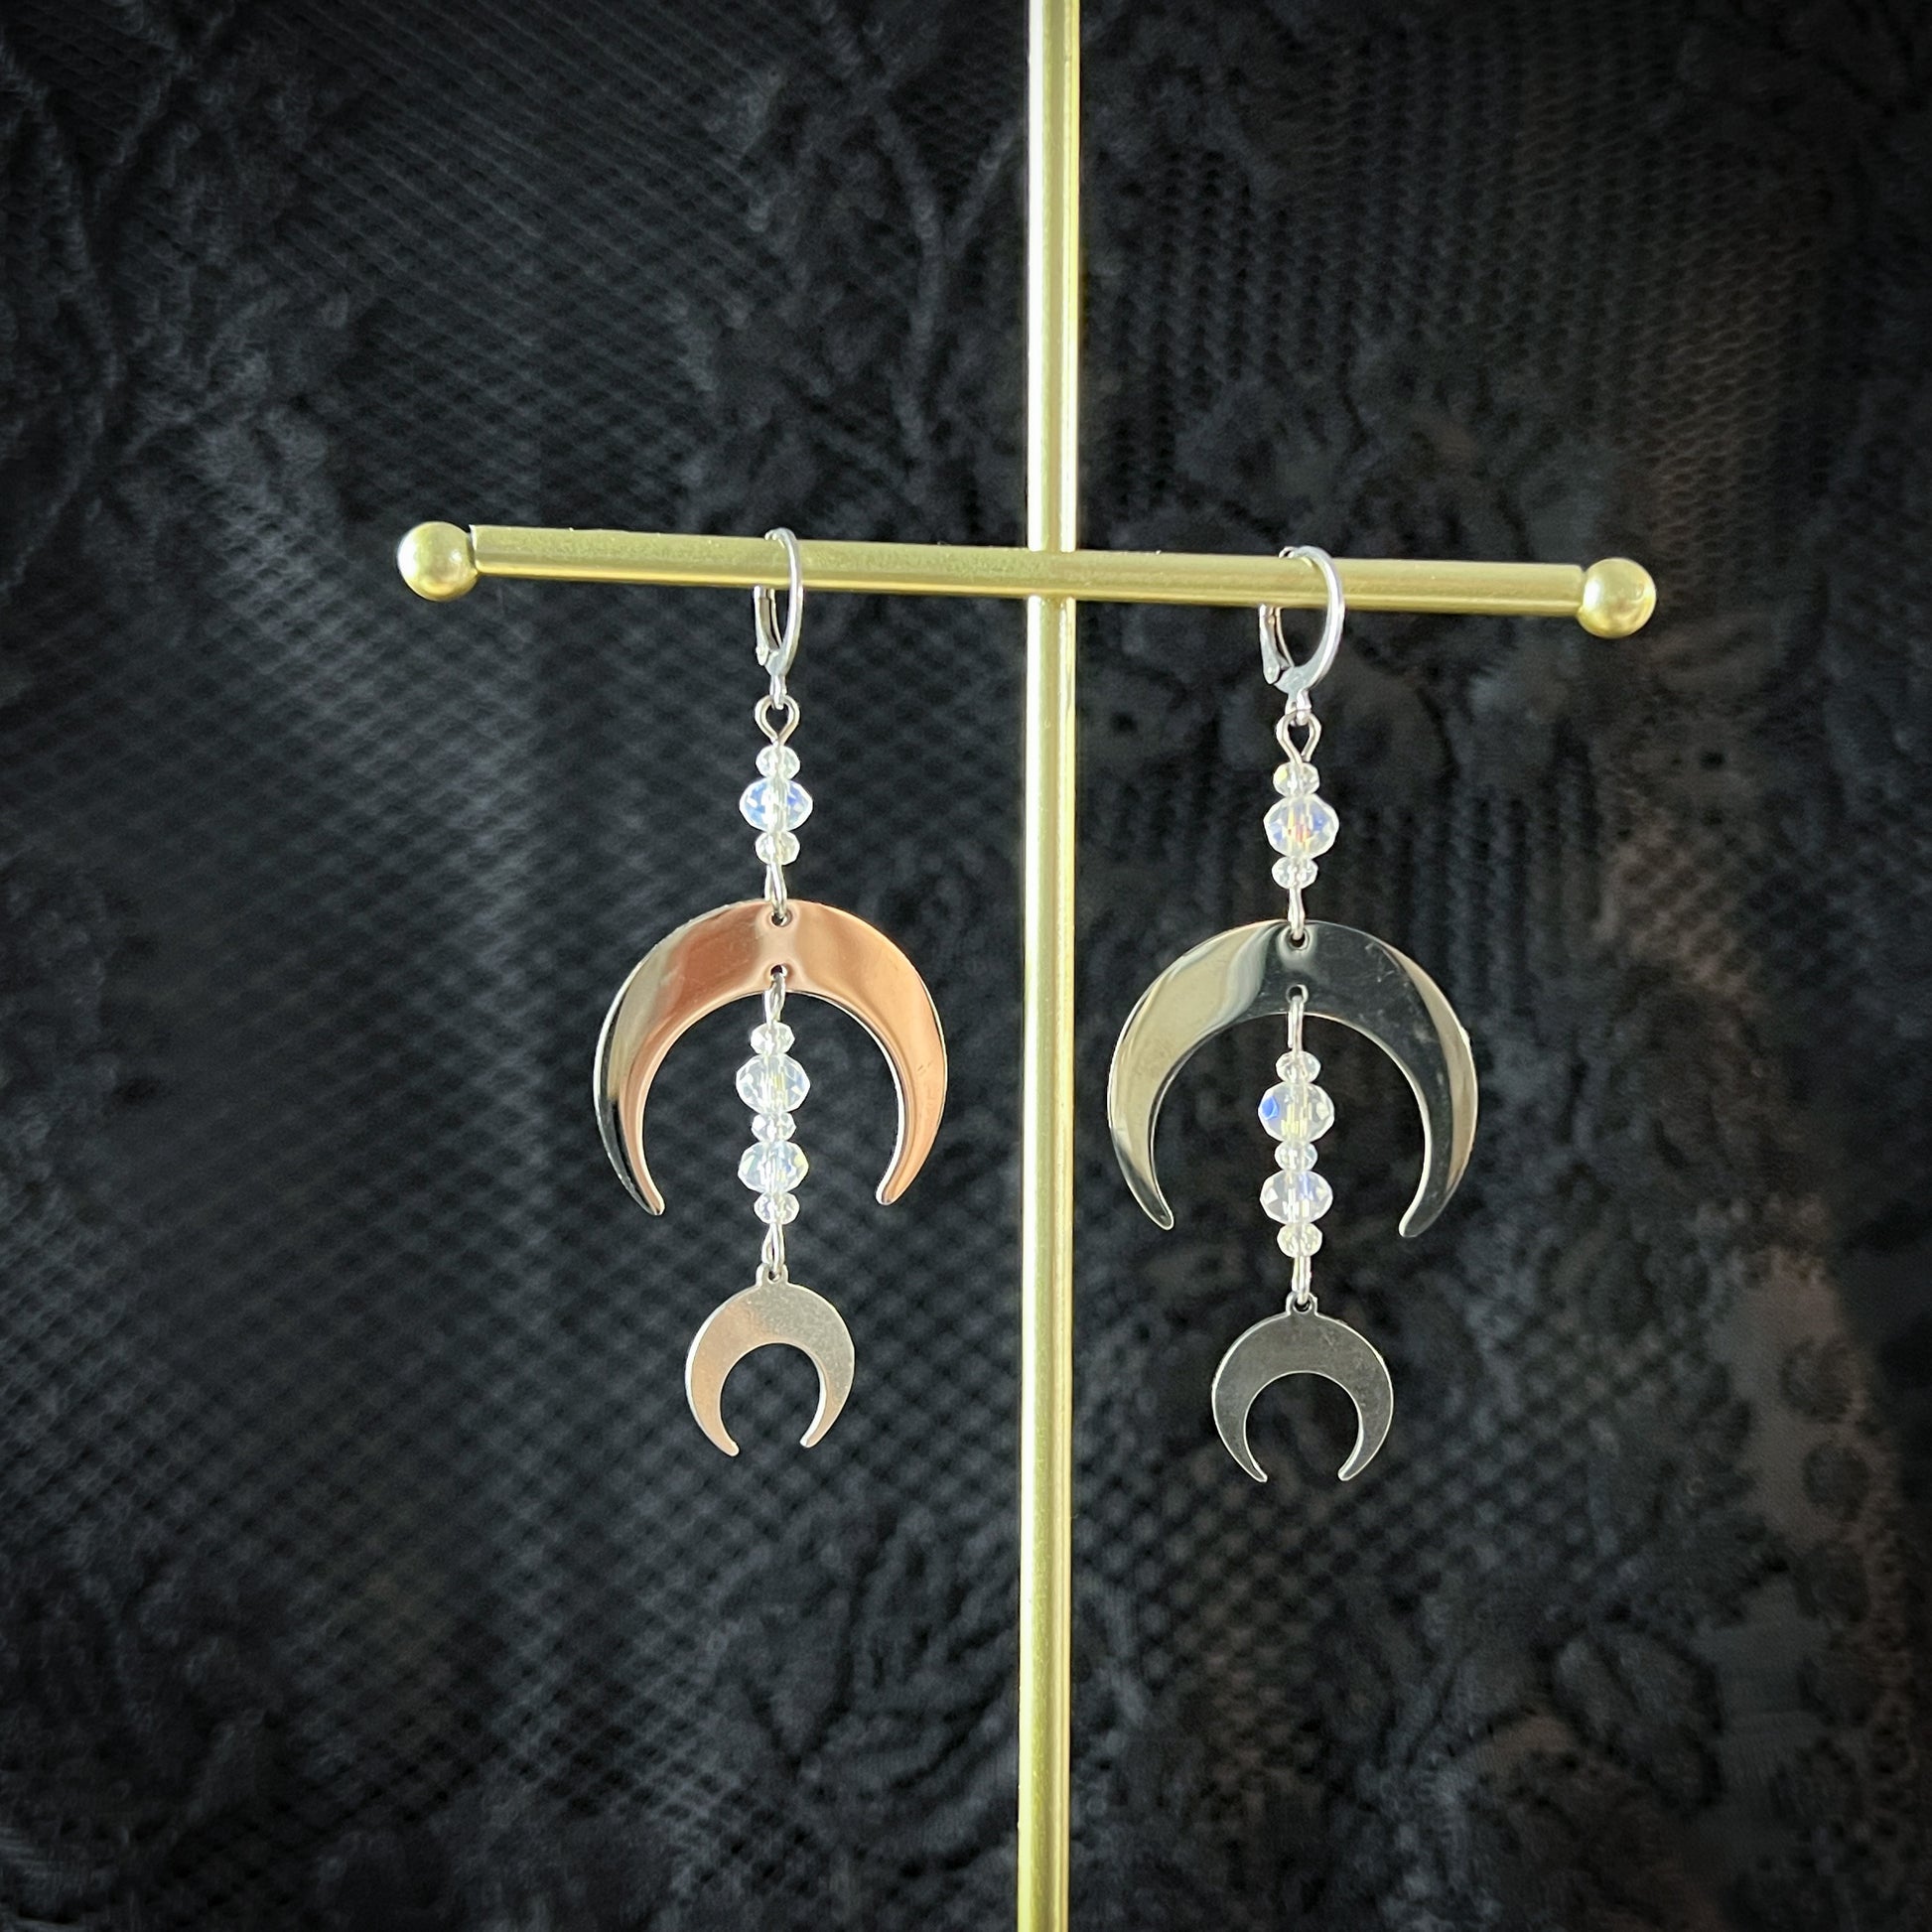 Crescent Moon earrings with faceted crystal beads celestial witchy gothic stainless steel jewellery